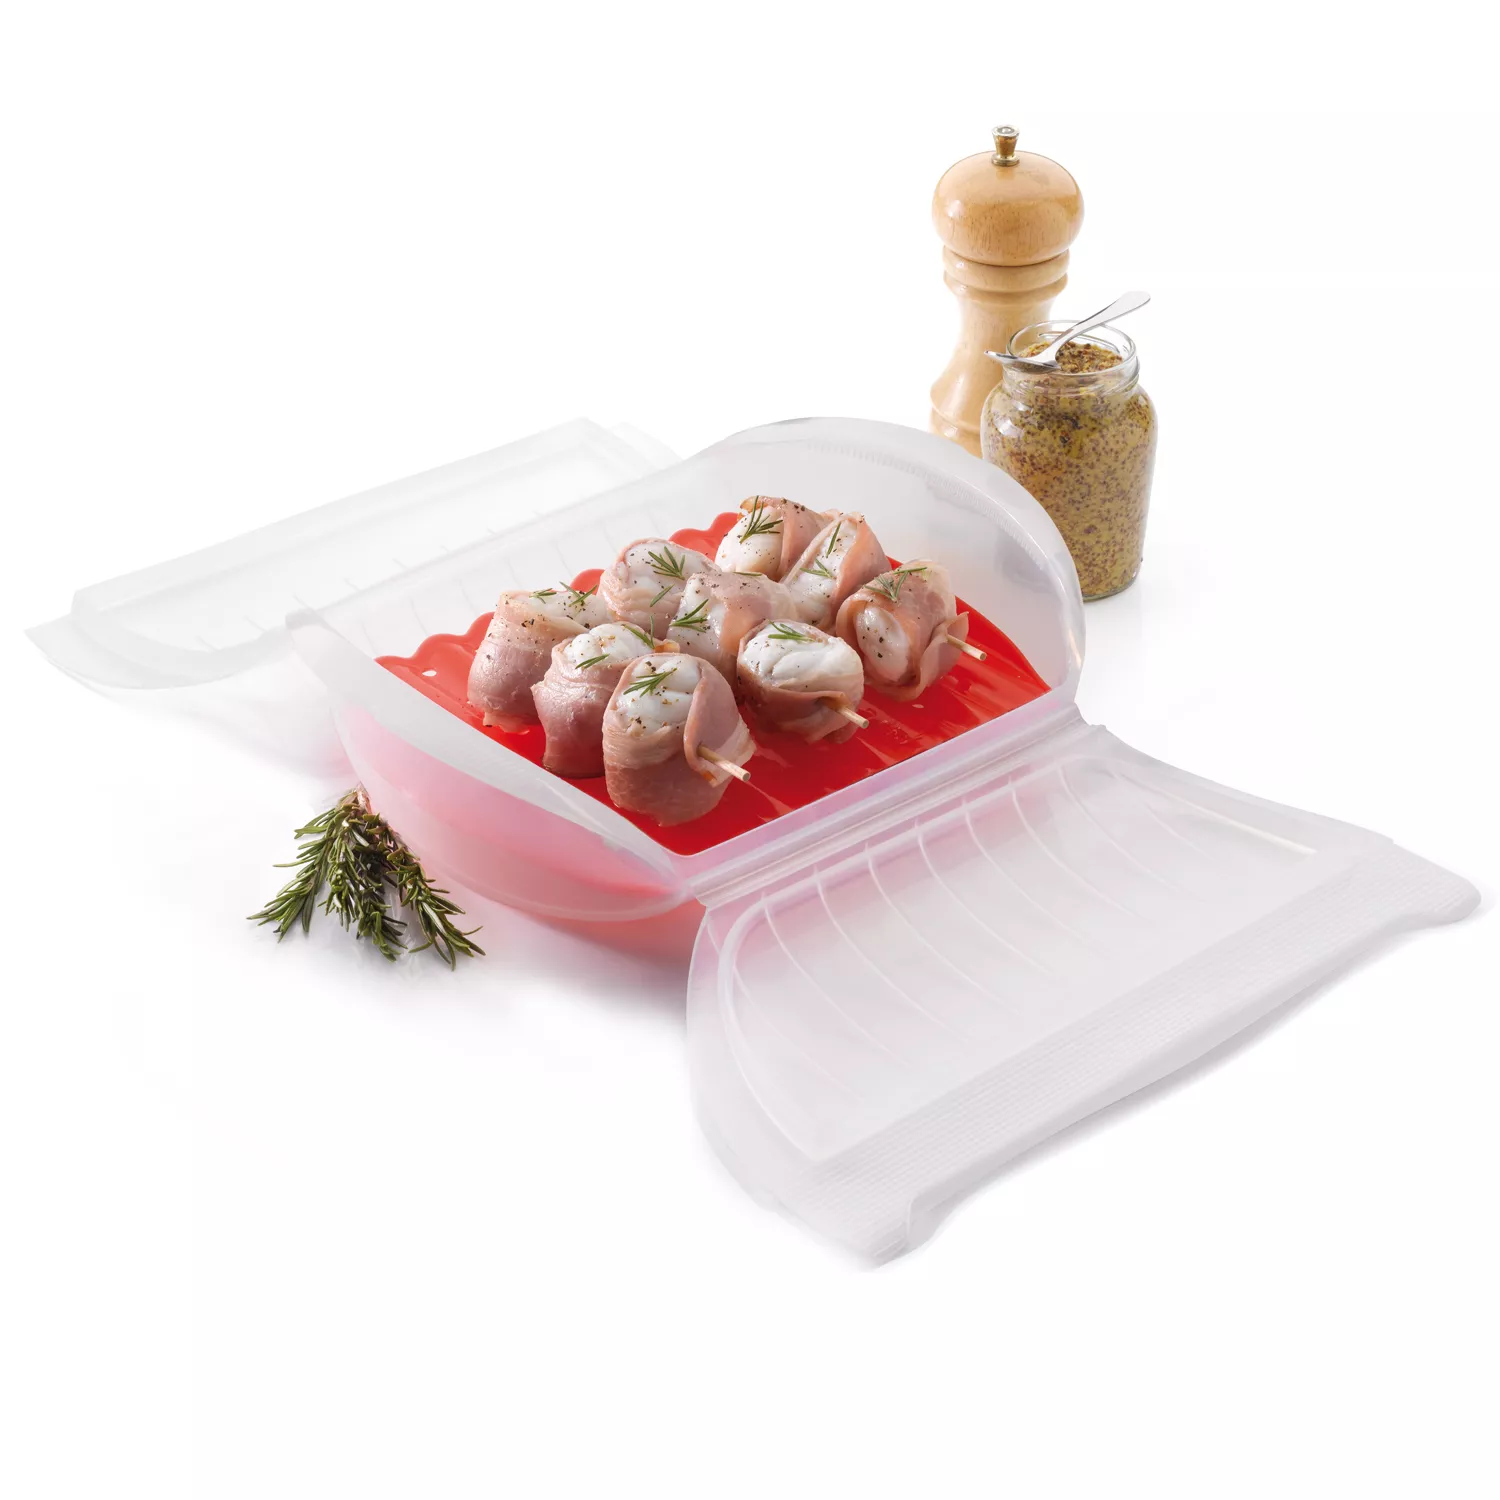  Lekue Steam Case with Draining Tray for 3 to 4 Person